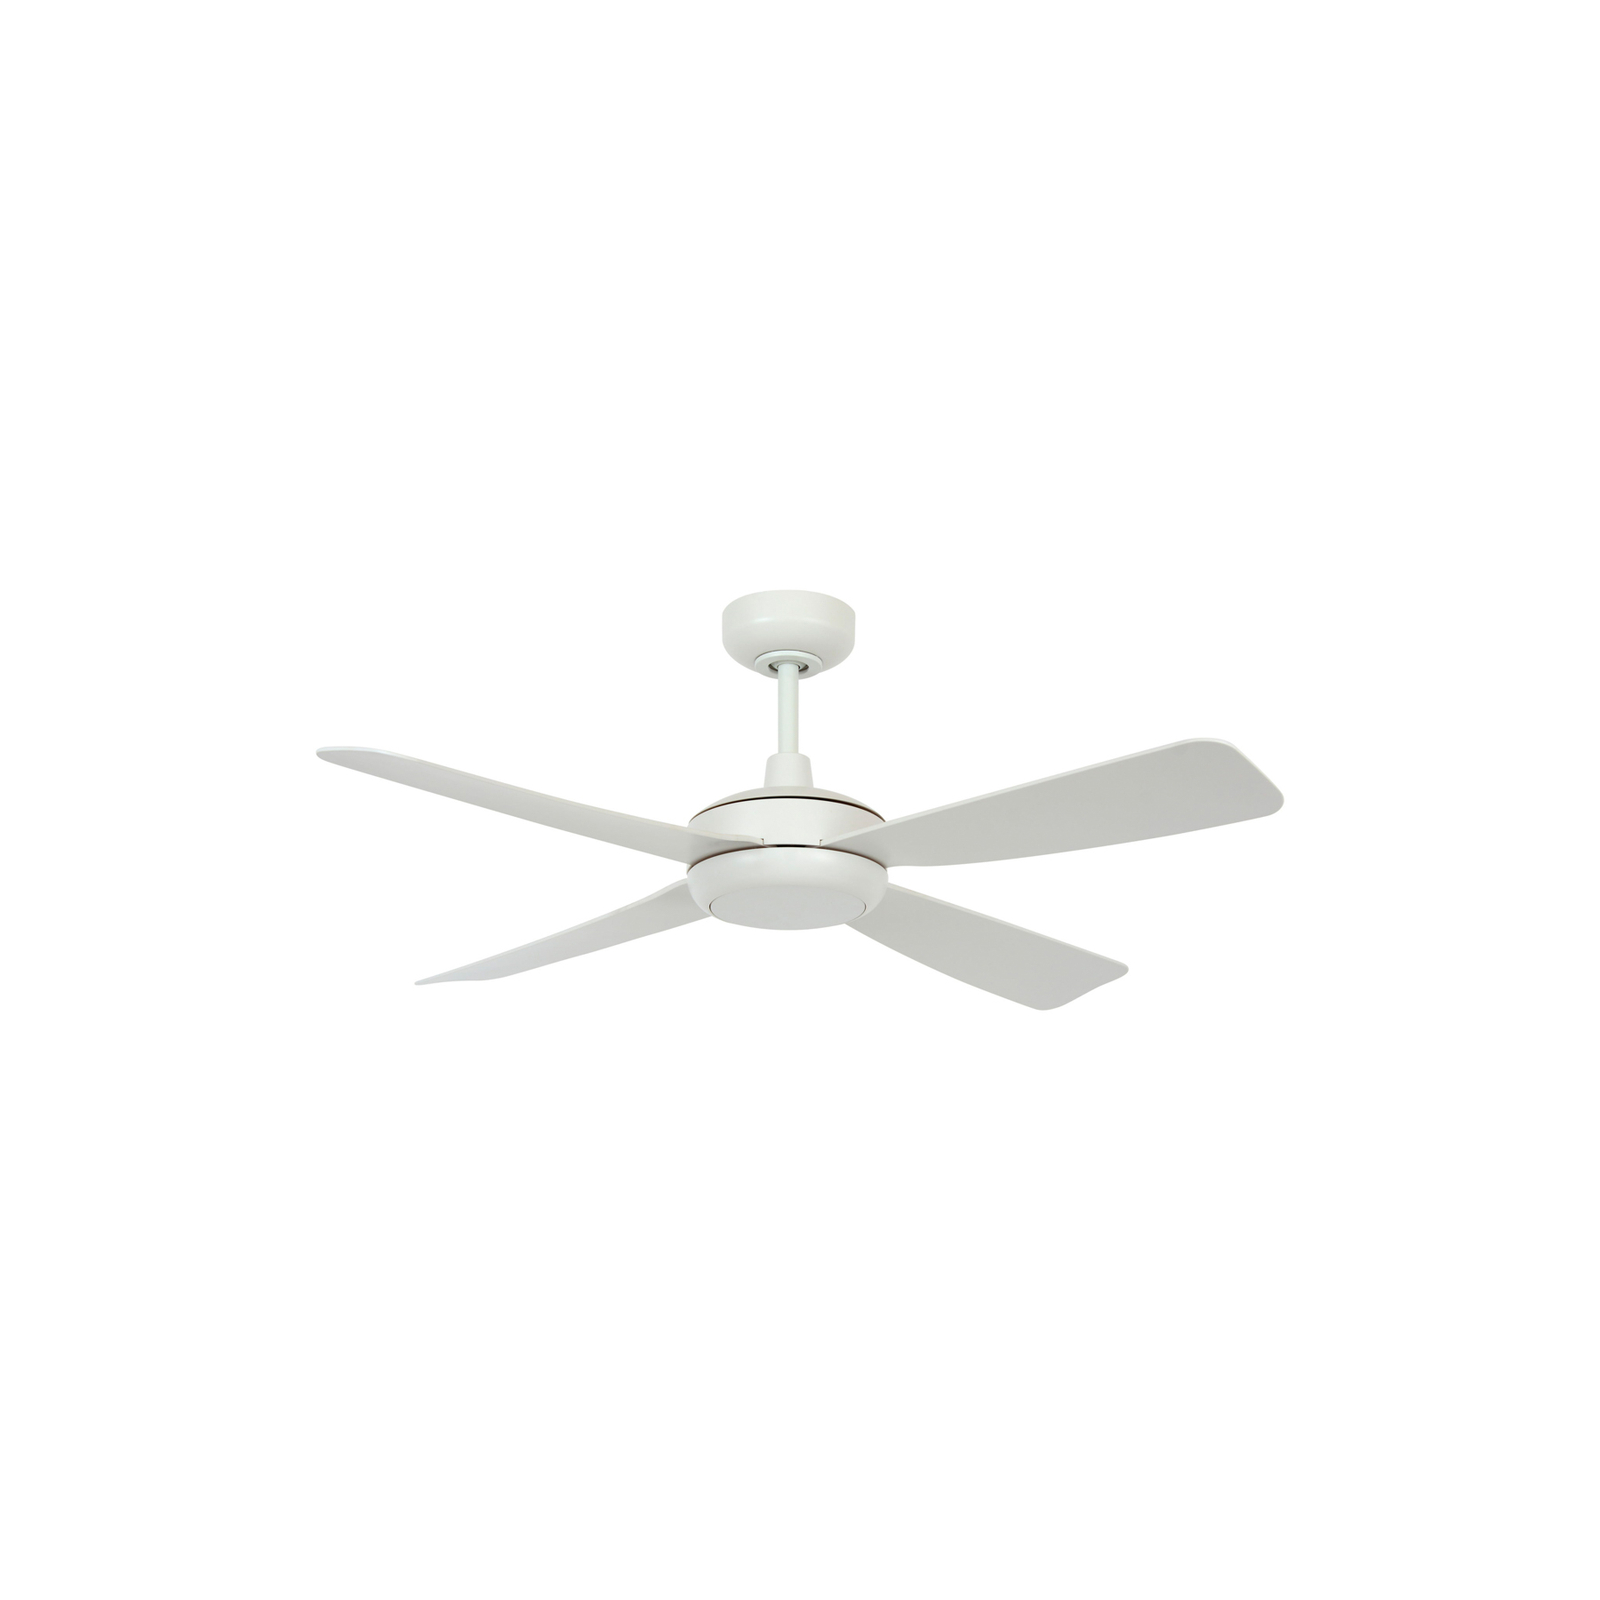 Beacon ceiling fan with light Slipstream, white, quiet